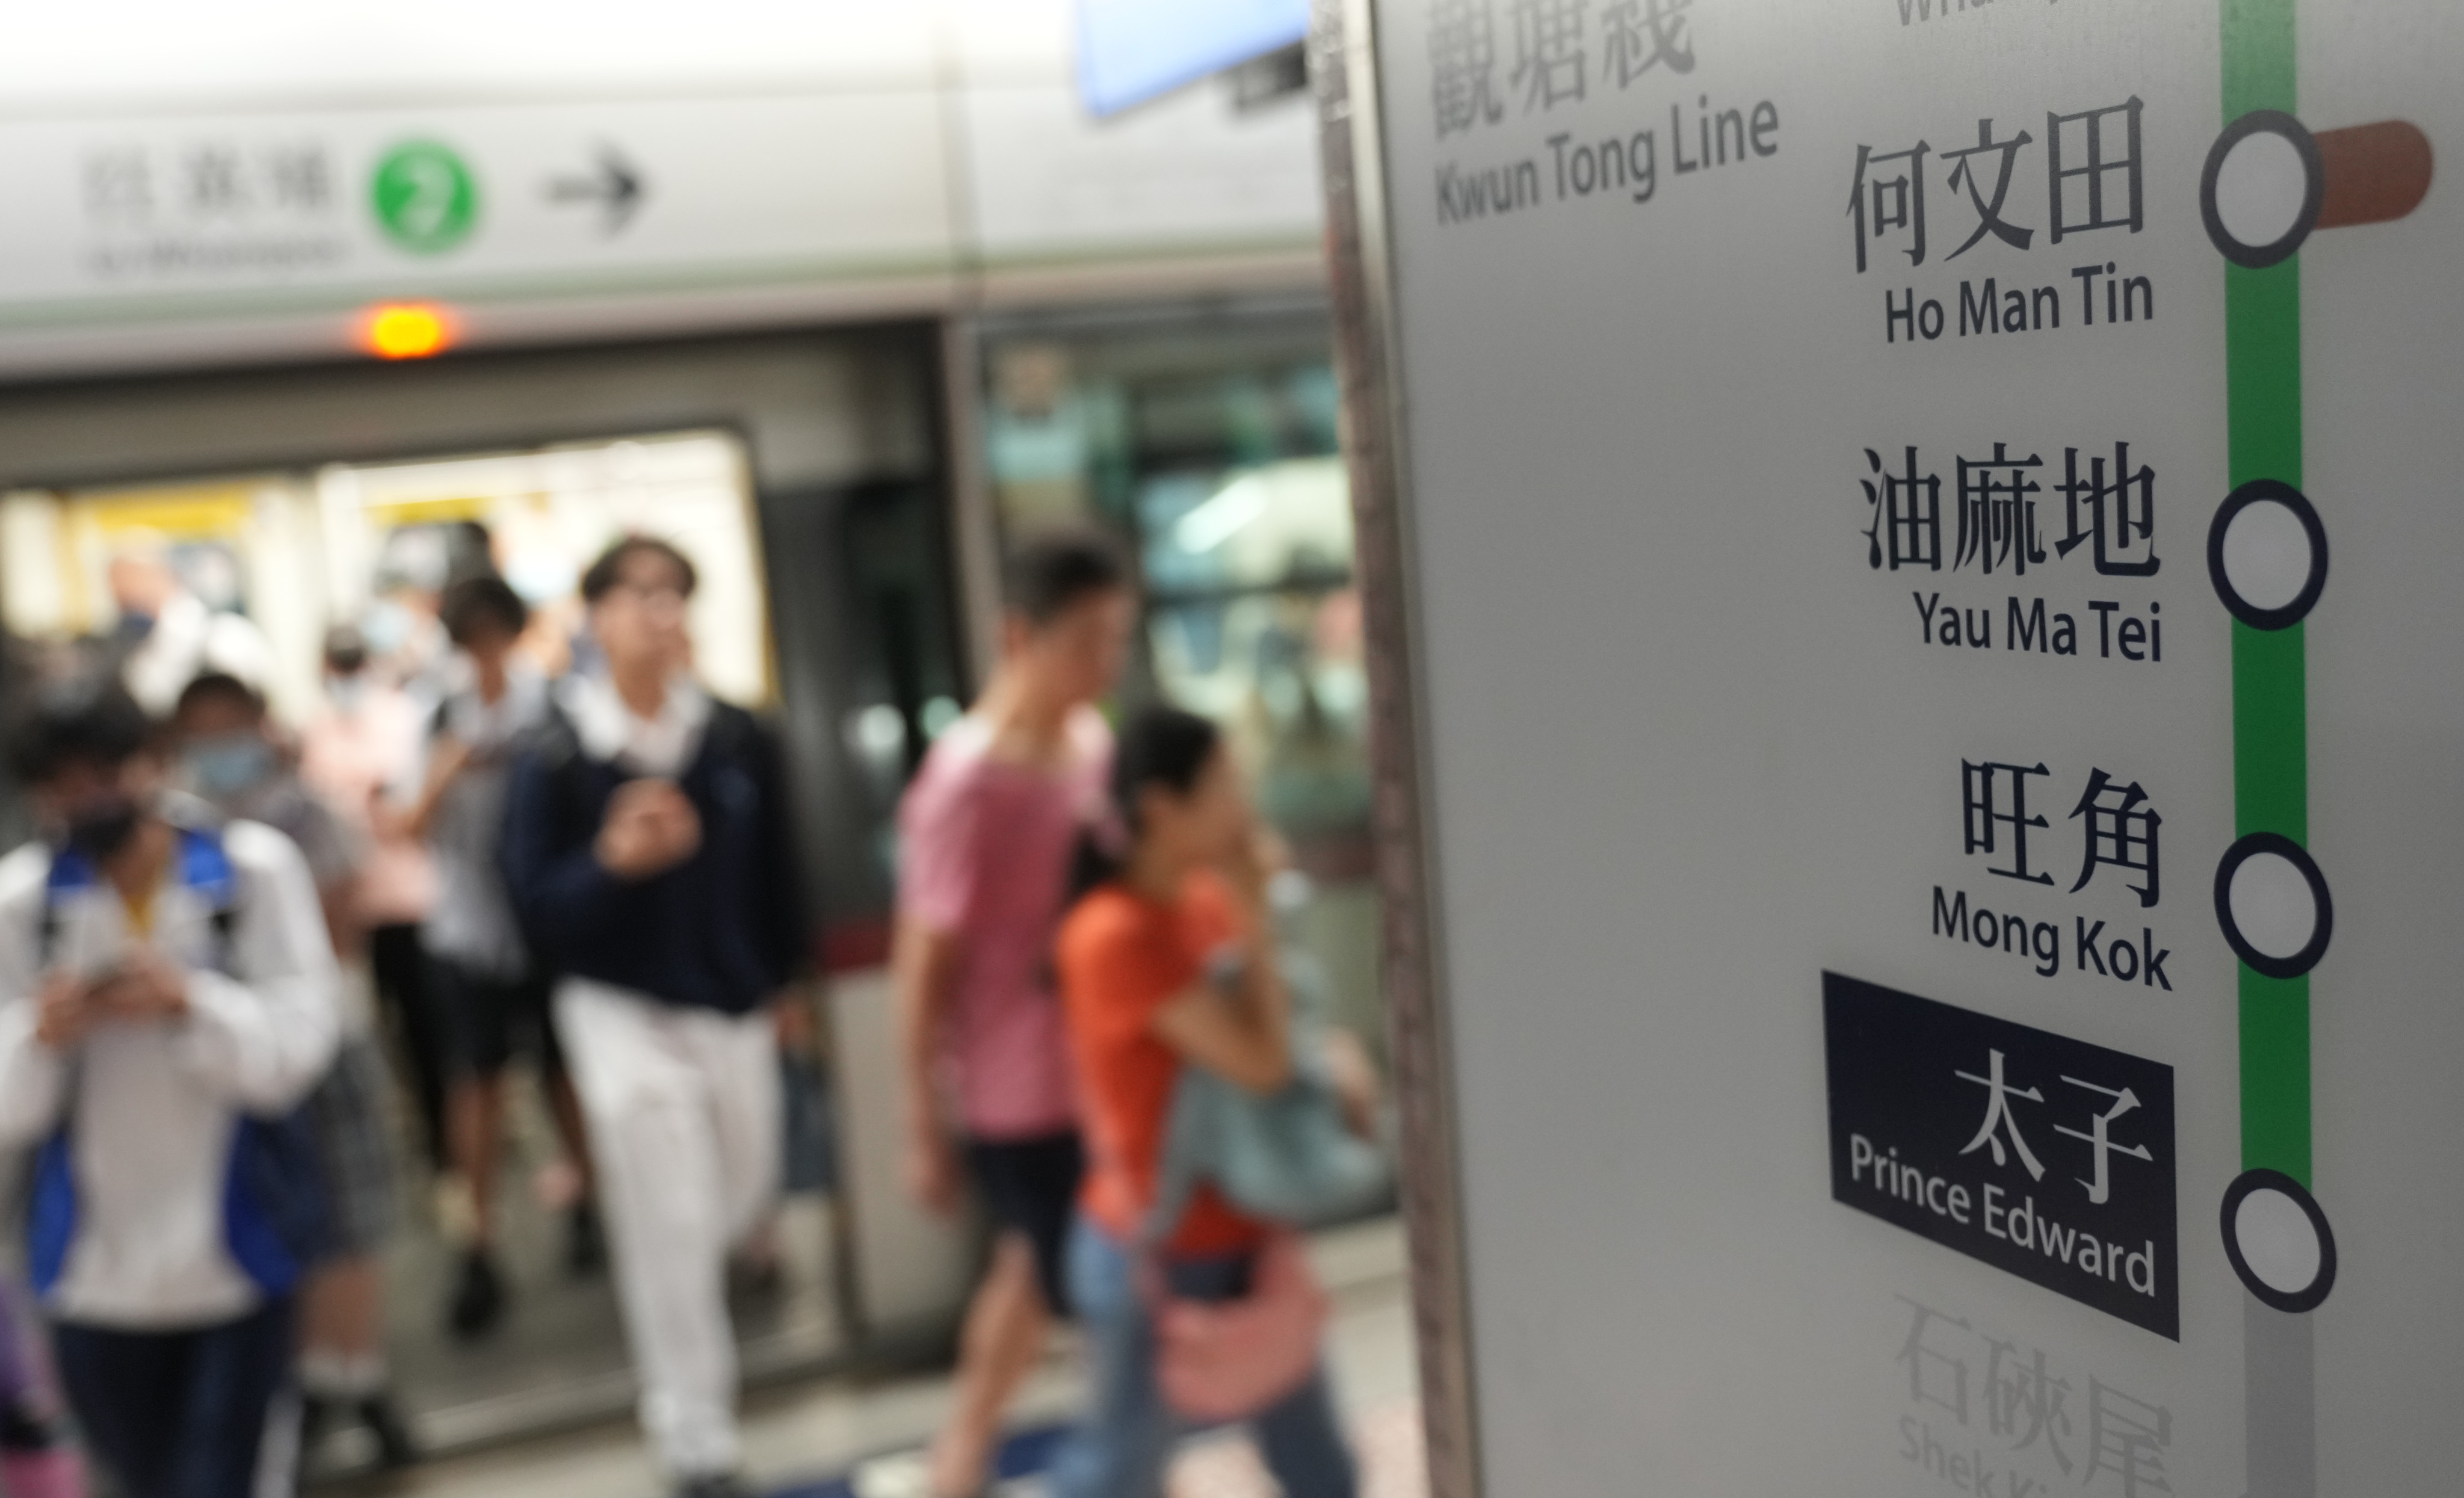 The MTR Corporation says the service suspension will span Prince Edward, Mong Kok, Yau Ma Tei and Ho Man Tin stations, with works limited to 28 hours. Photo: Sam Tsang